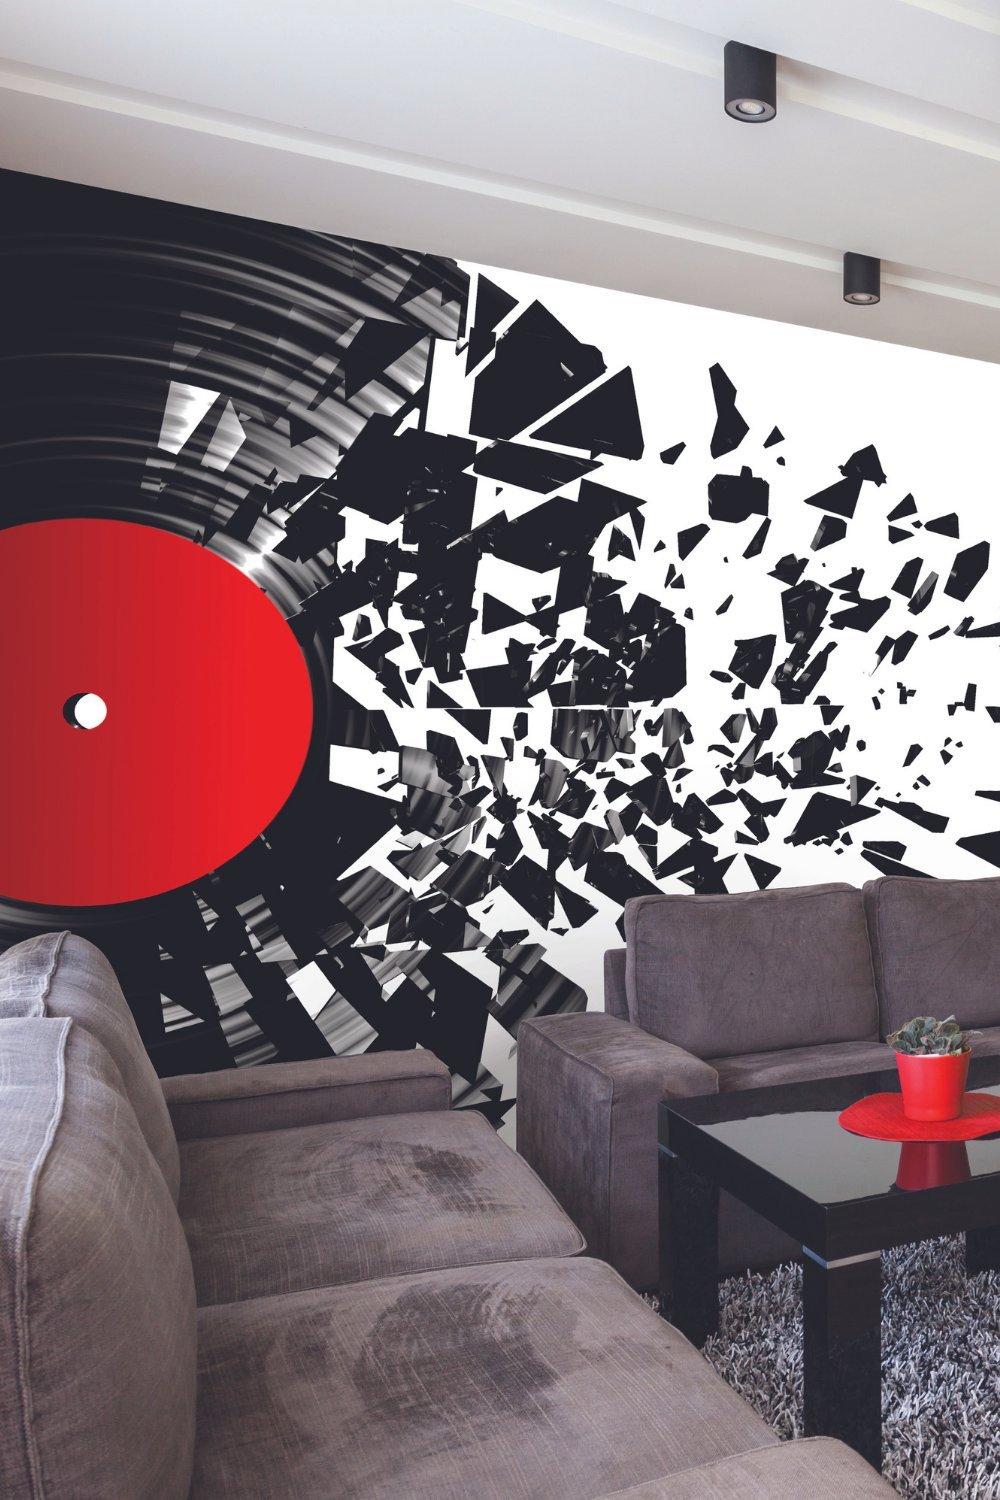 Smashed Vinyl Matt Smooth Paste the Wall Mural 350cm wide x 280cm high